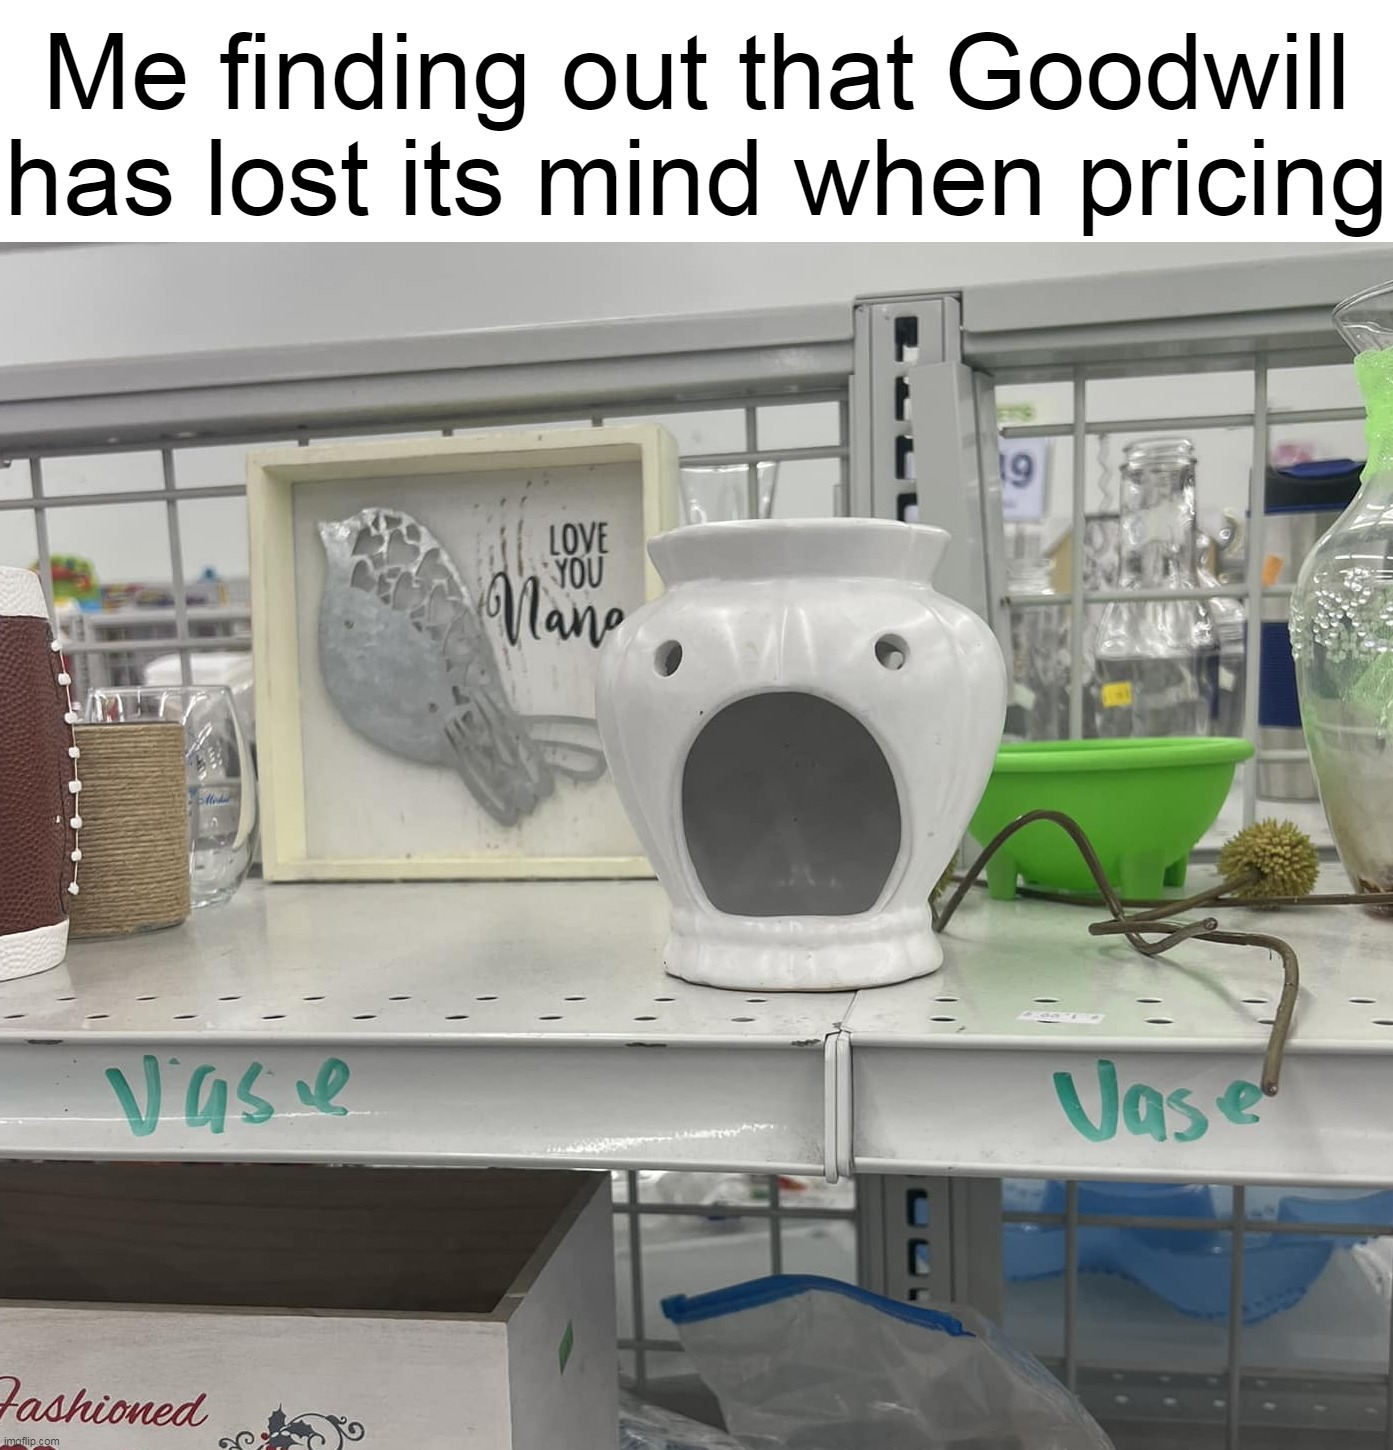 Me finding out that Goodwill has lost its mind when pricing | image tagged in meme,memes,funny,humor | made w/ Imgflip meme maker